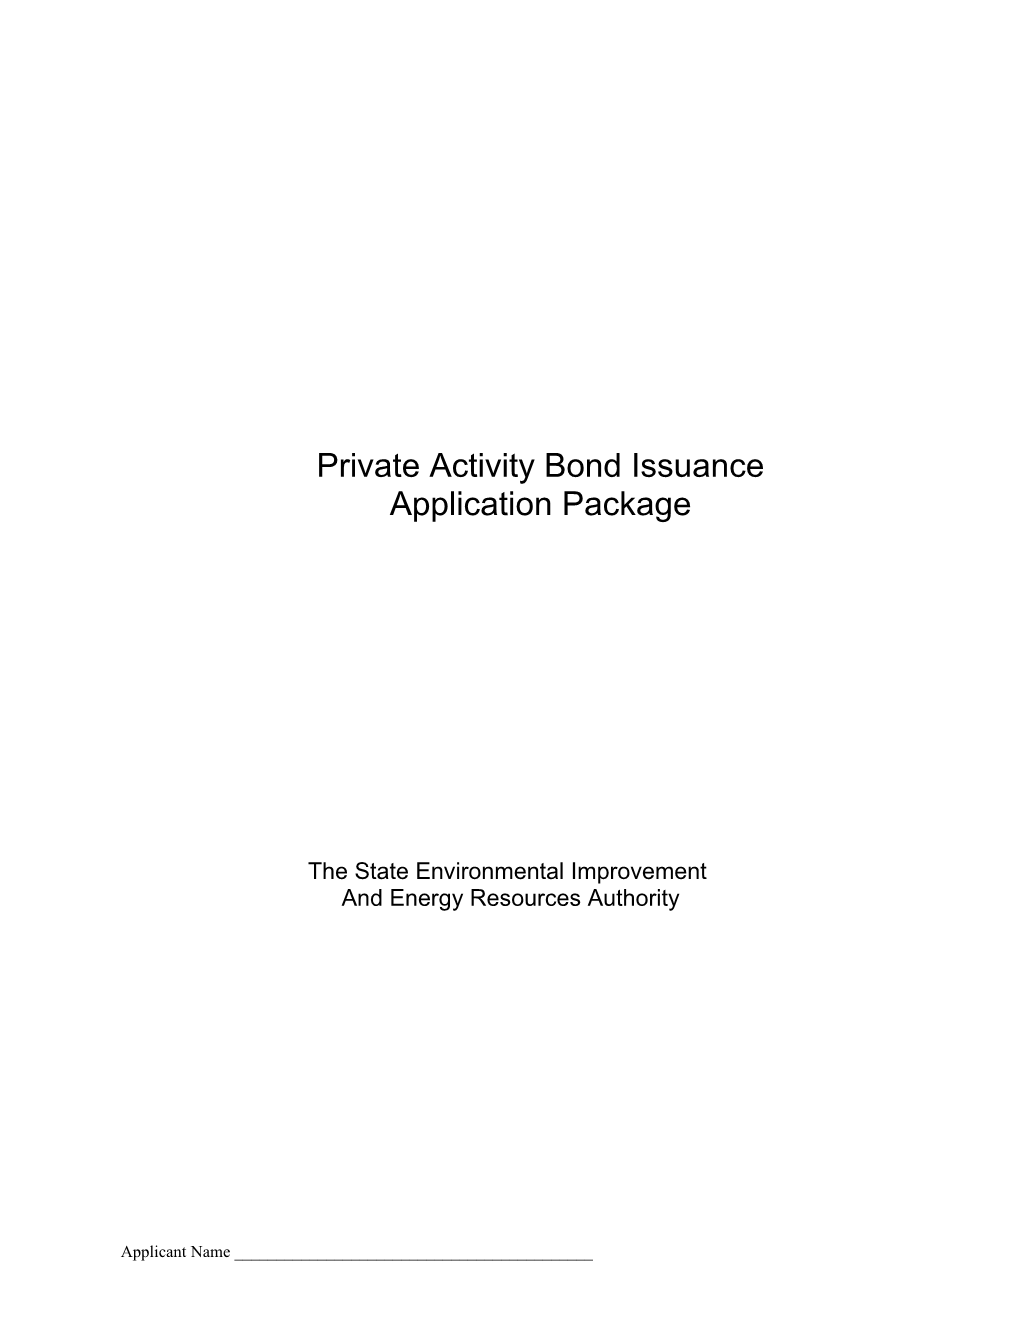 Private Activity Financing Application